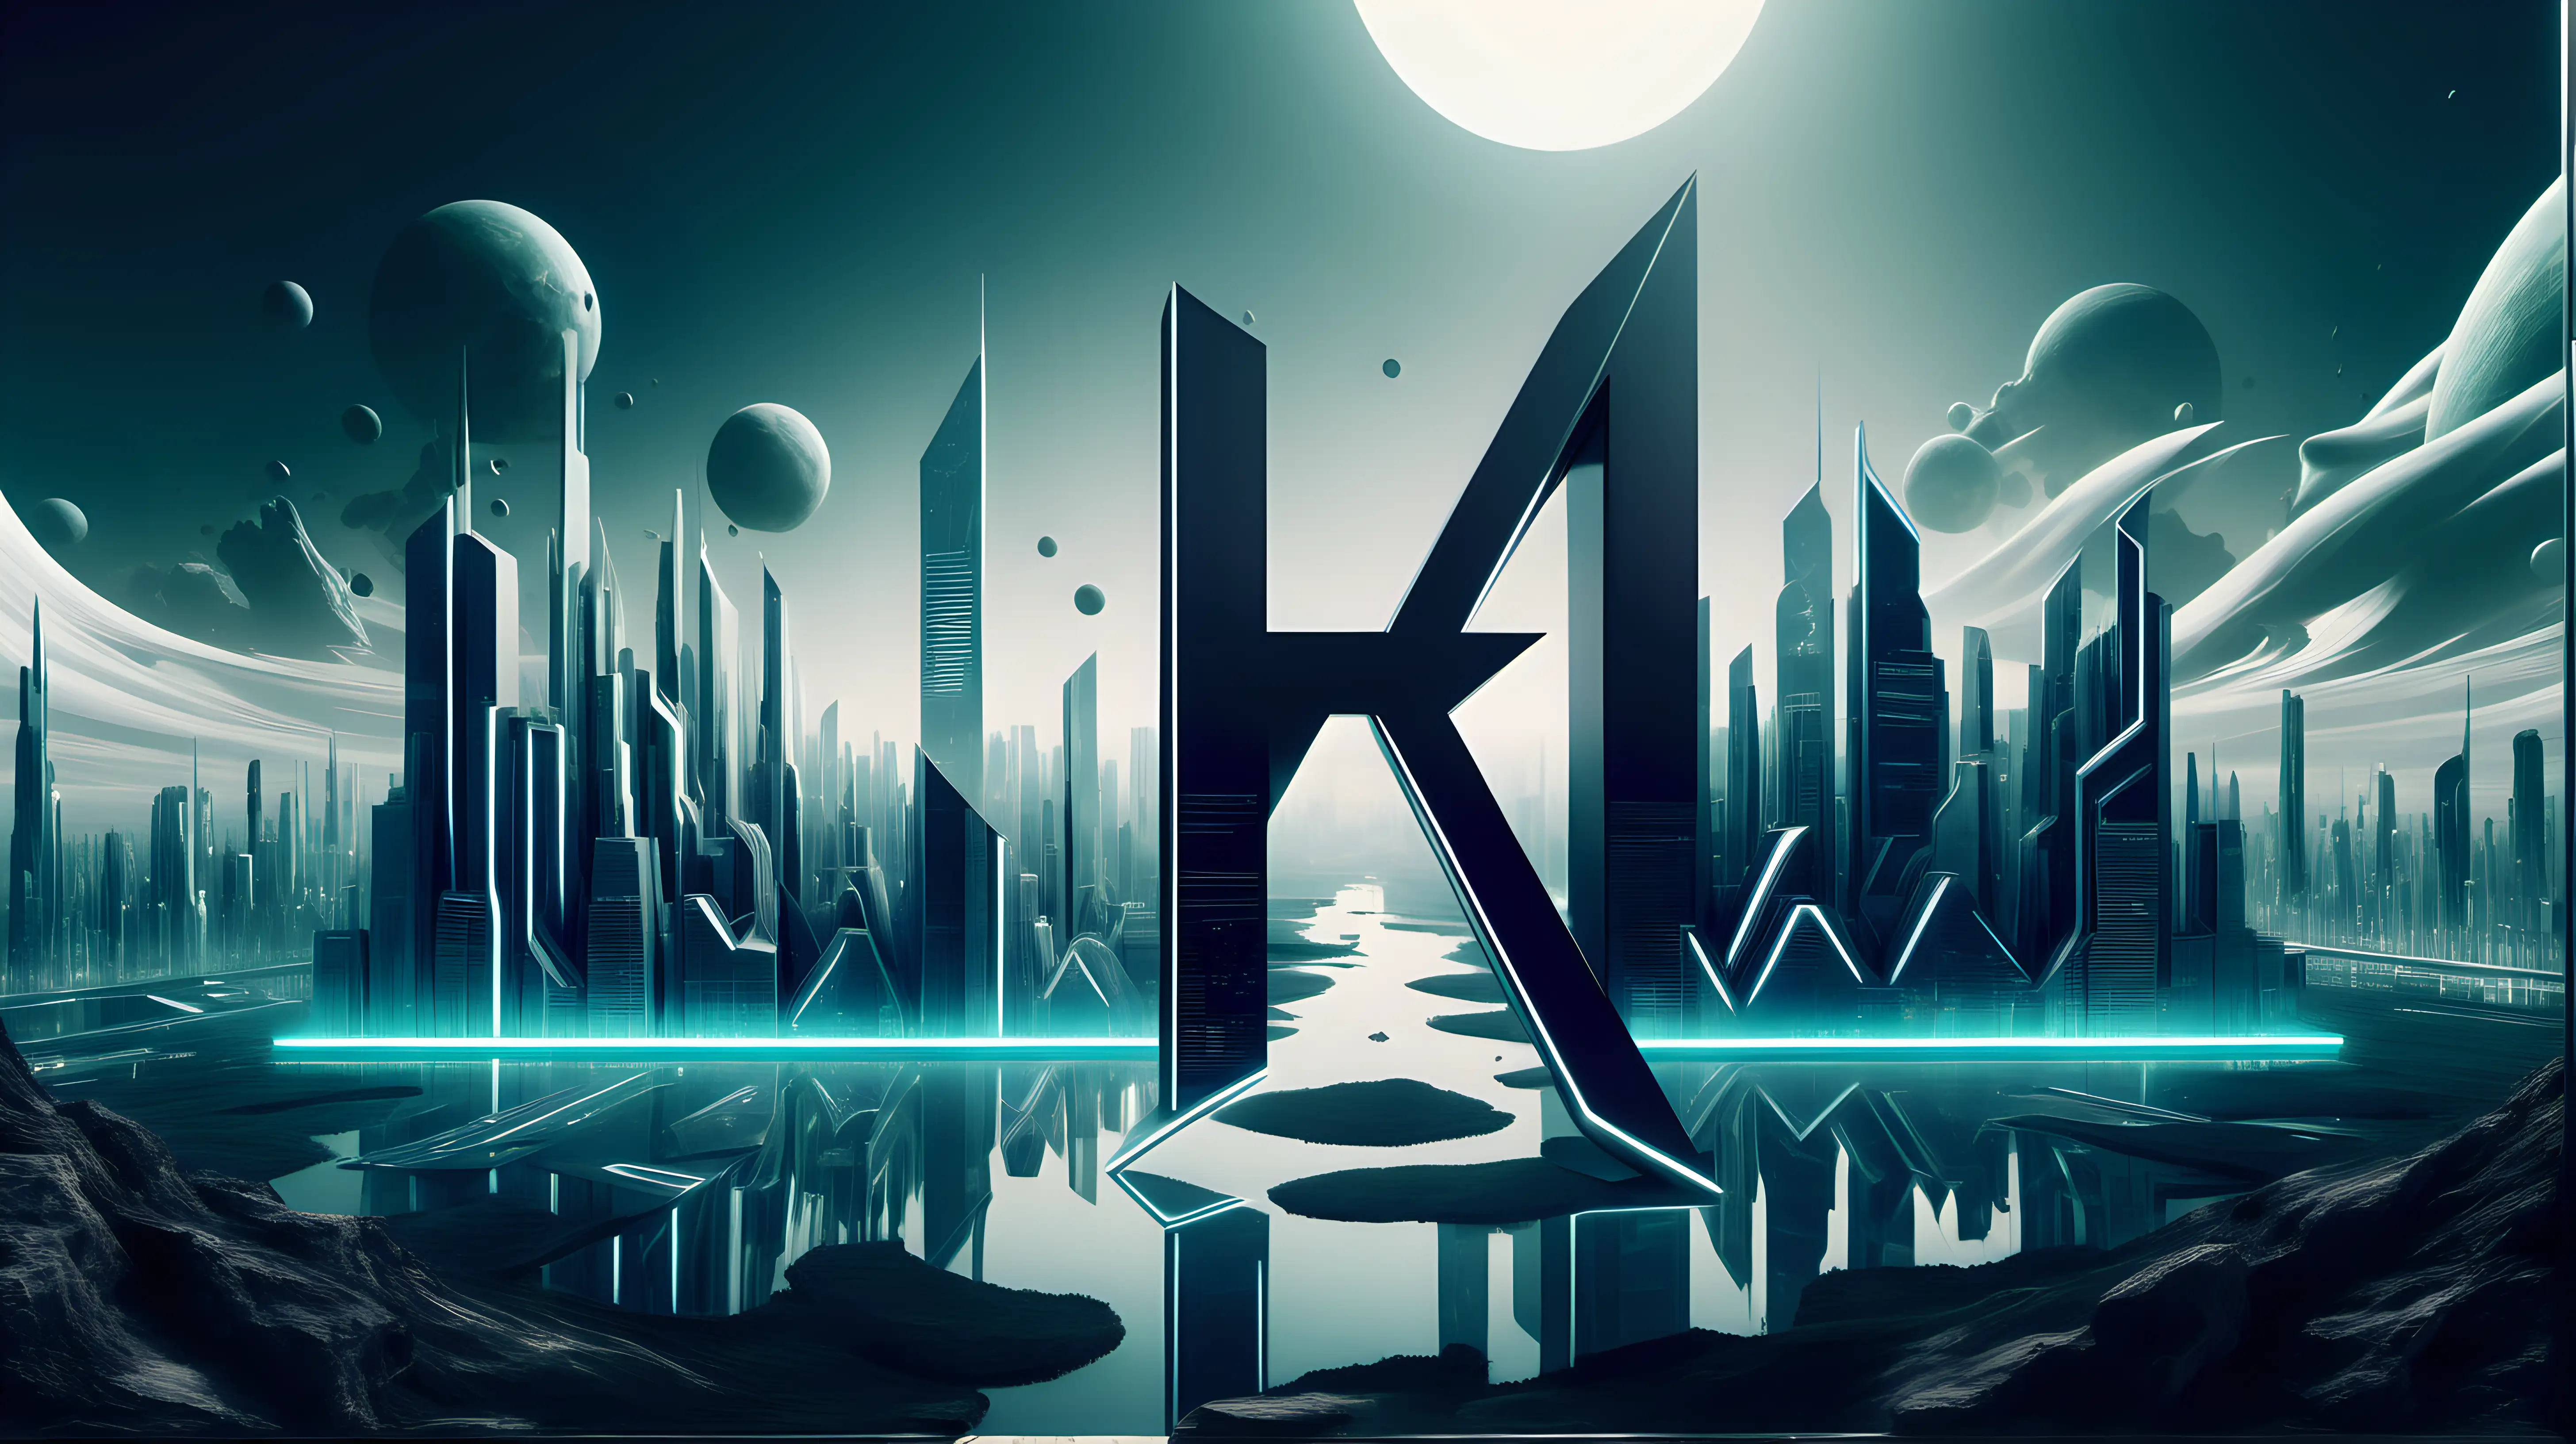 "V.R" displayed prominently in sleek, futuristic lettering against a backdrop of digital landscapes.